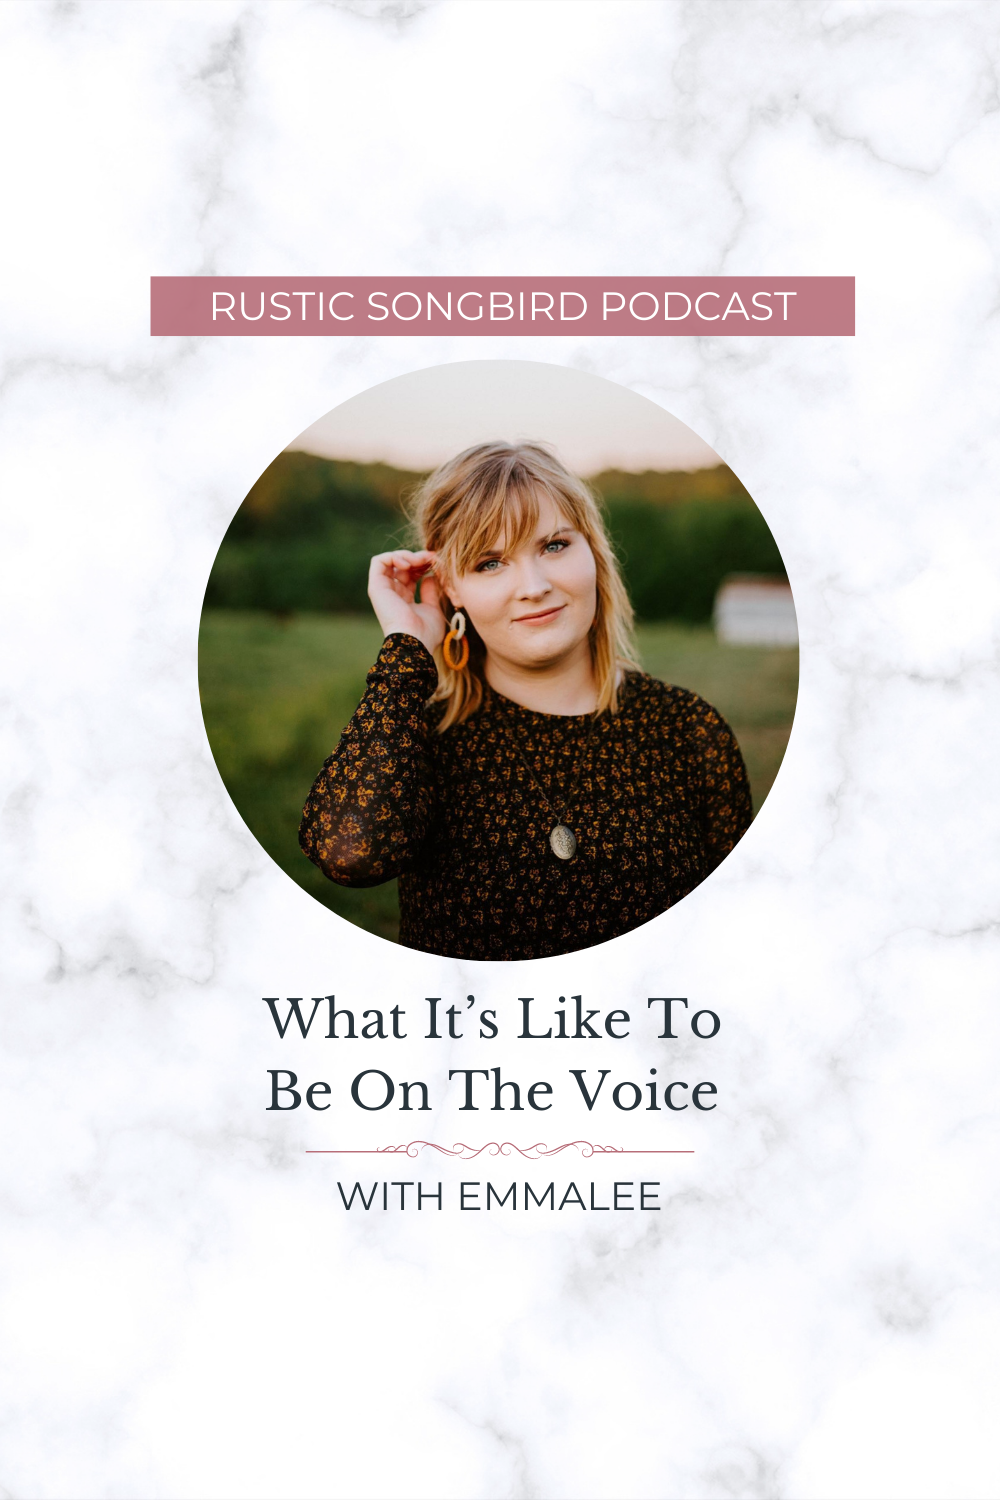 In this episode of the Rustic Songbird Podcast, host Lydia Walker interviews Emmalee about her experience auditioning for NBC’s The Voice & being on #TeamKelly.